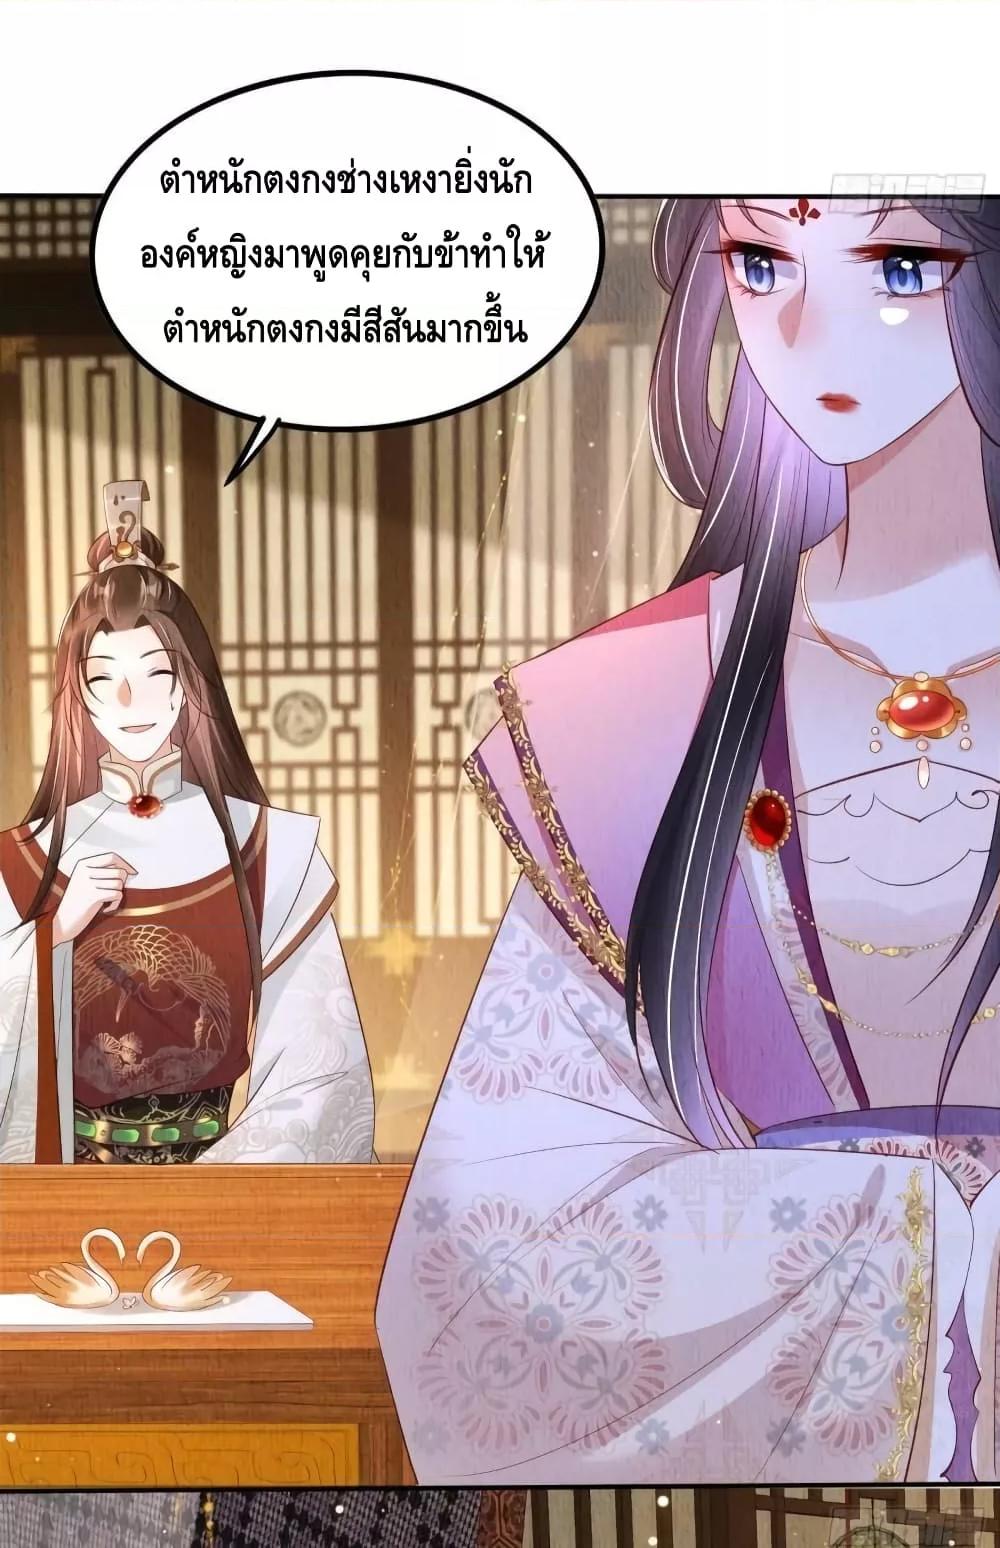 After I Bloom, a Hundred Flowers Will ill – ดอกไม้นับ ตอนที่ 53 (21)